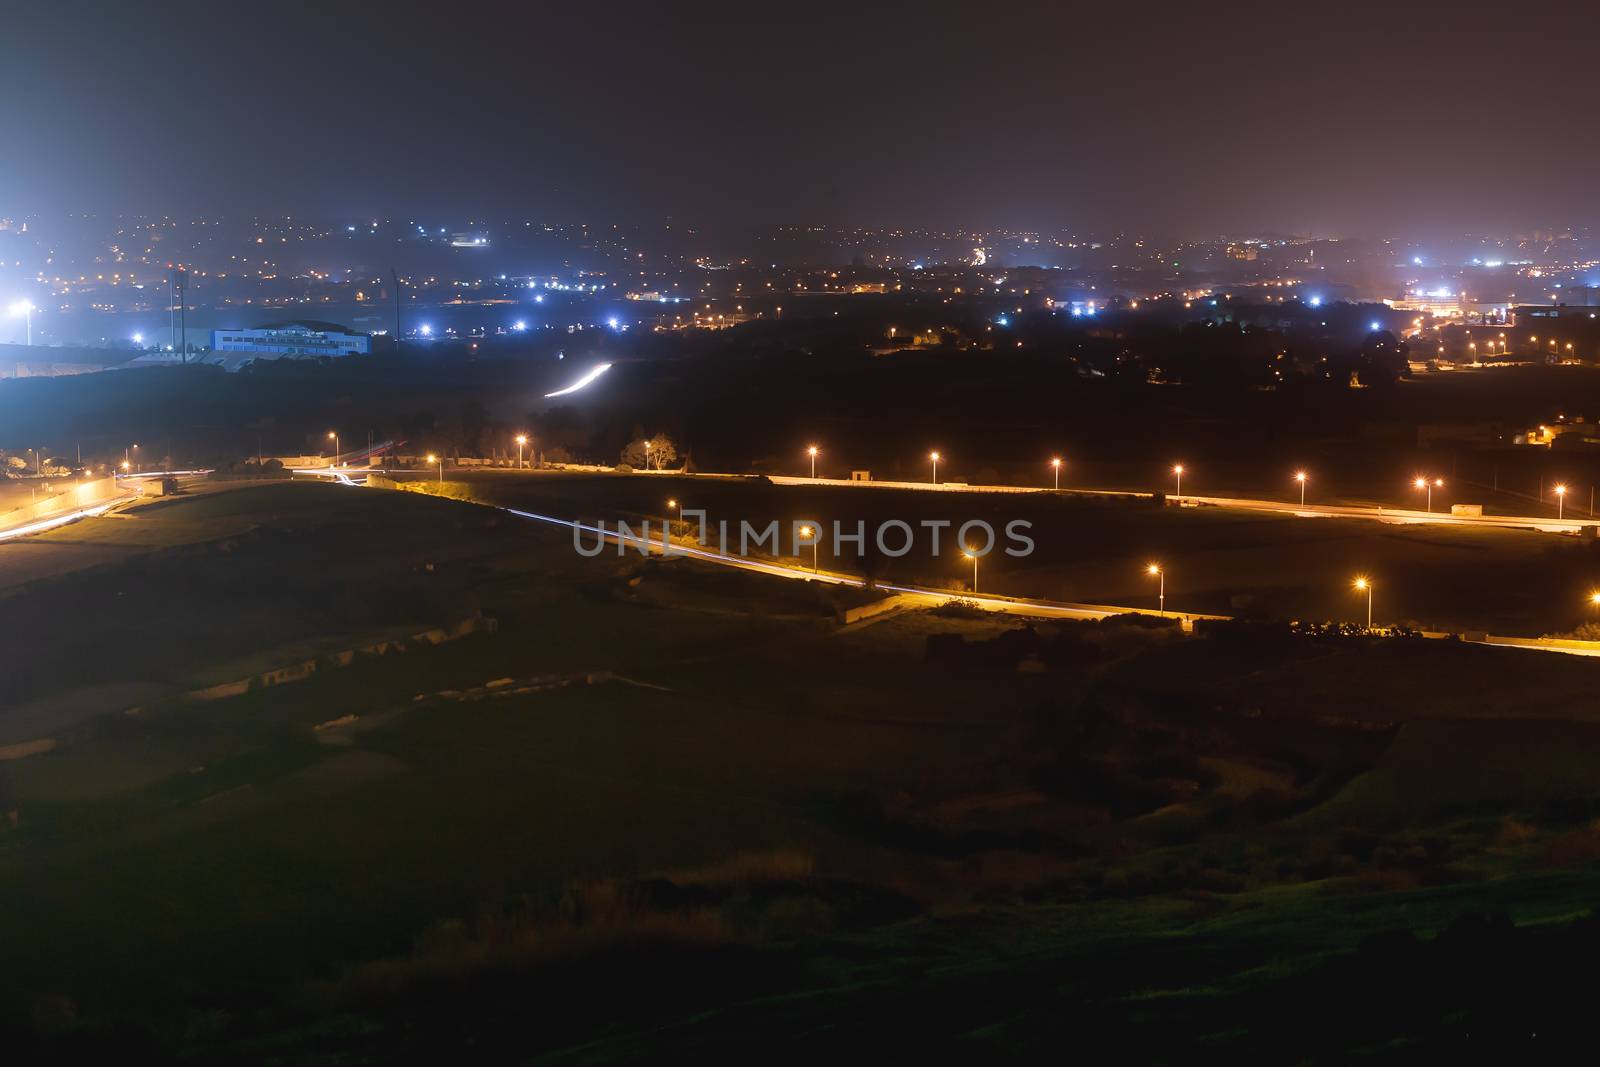 Night panorama view of illuminated roads and grounds around Mdina - old capital of Malta. Shooted with long exposure. by aksenovko